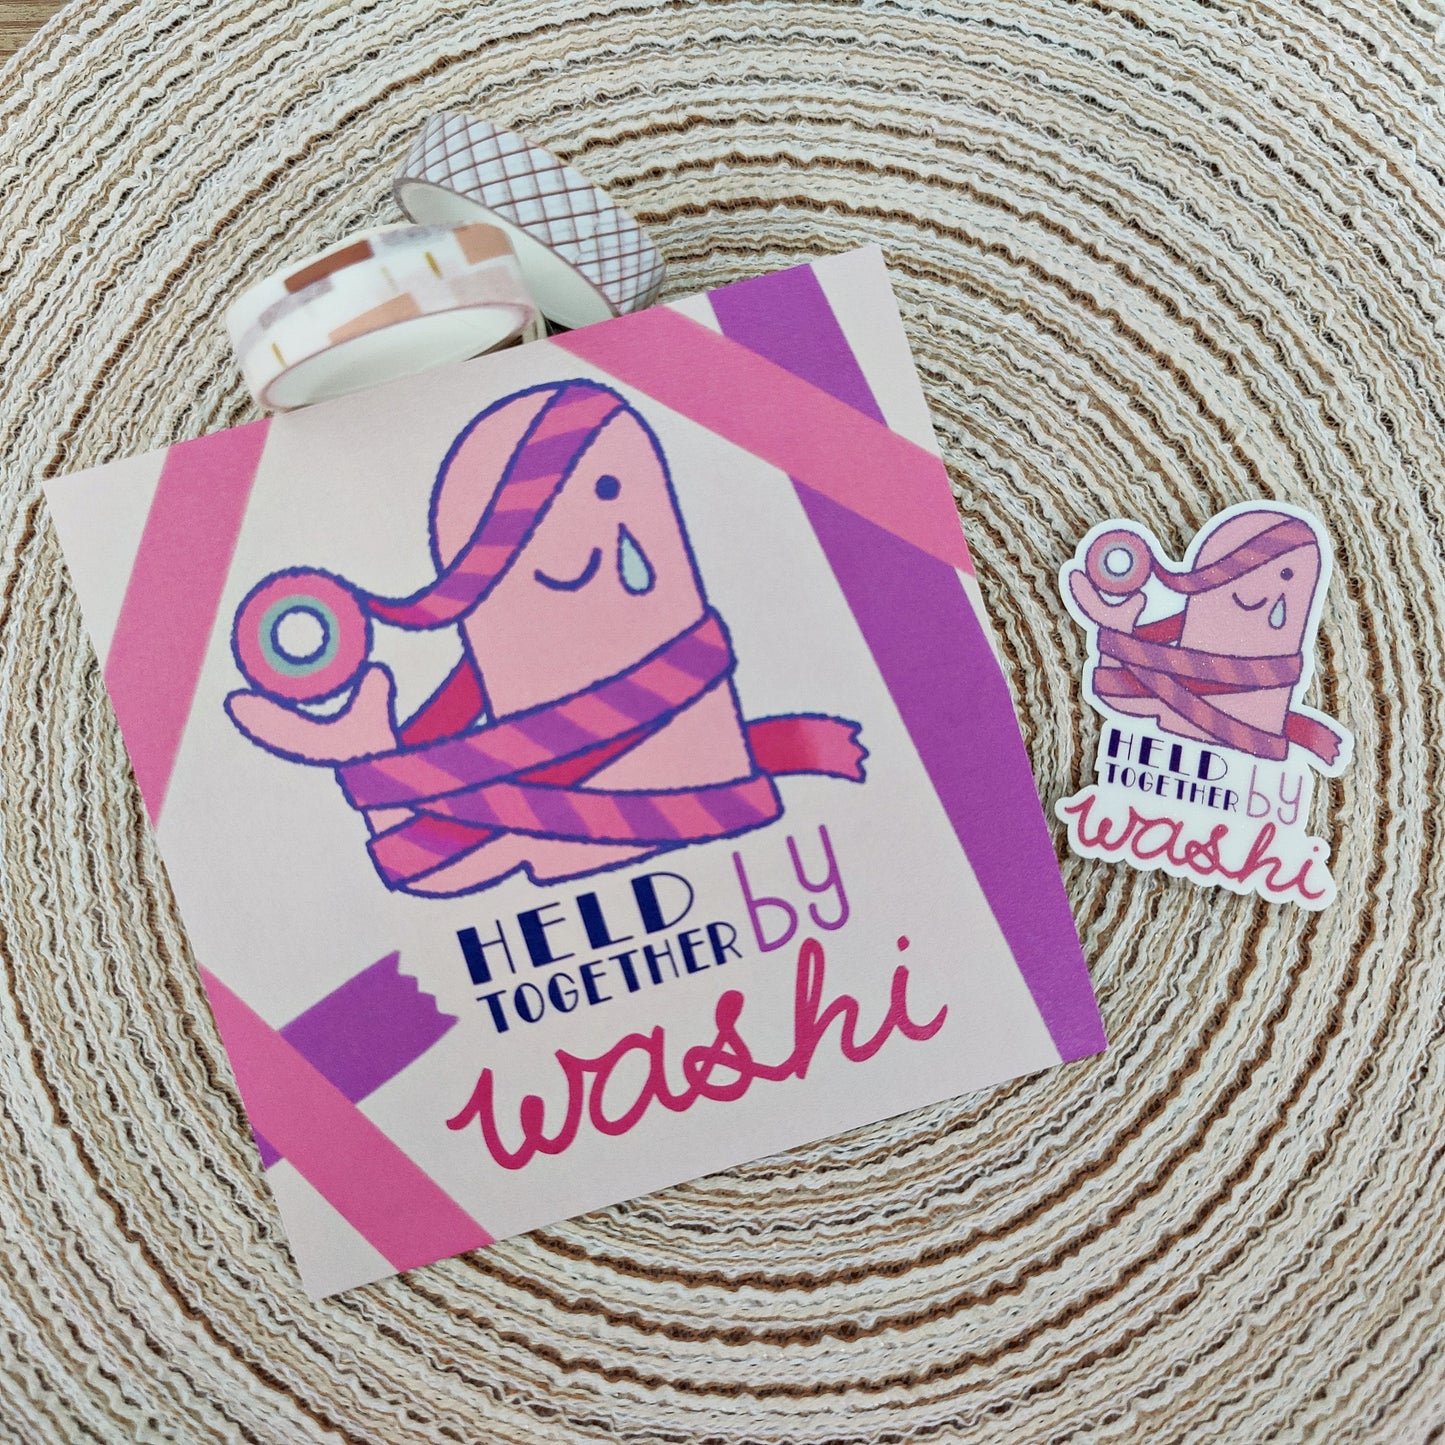 Held Together by Washi Sticker